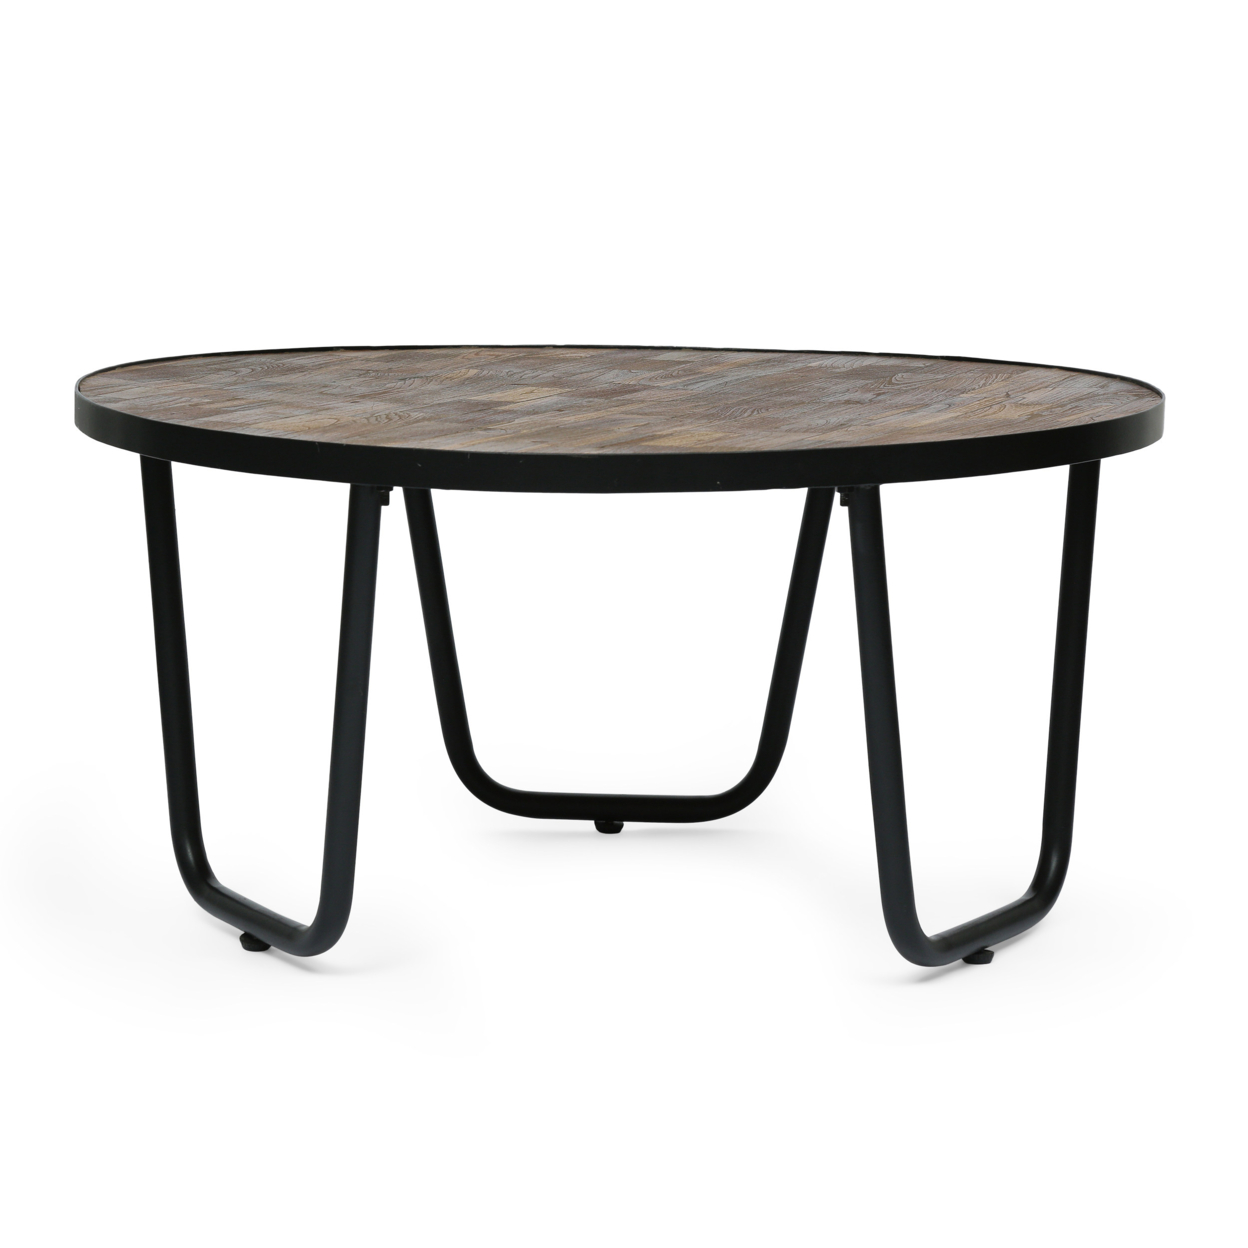 Wiers Modern Industrial Handcrafted Wooden Coffee Table, Natural And Black